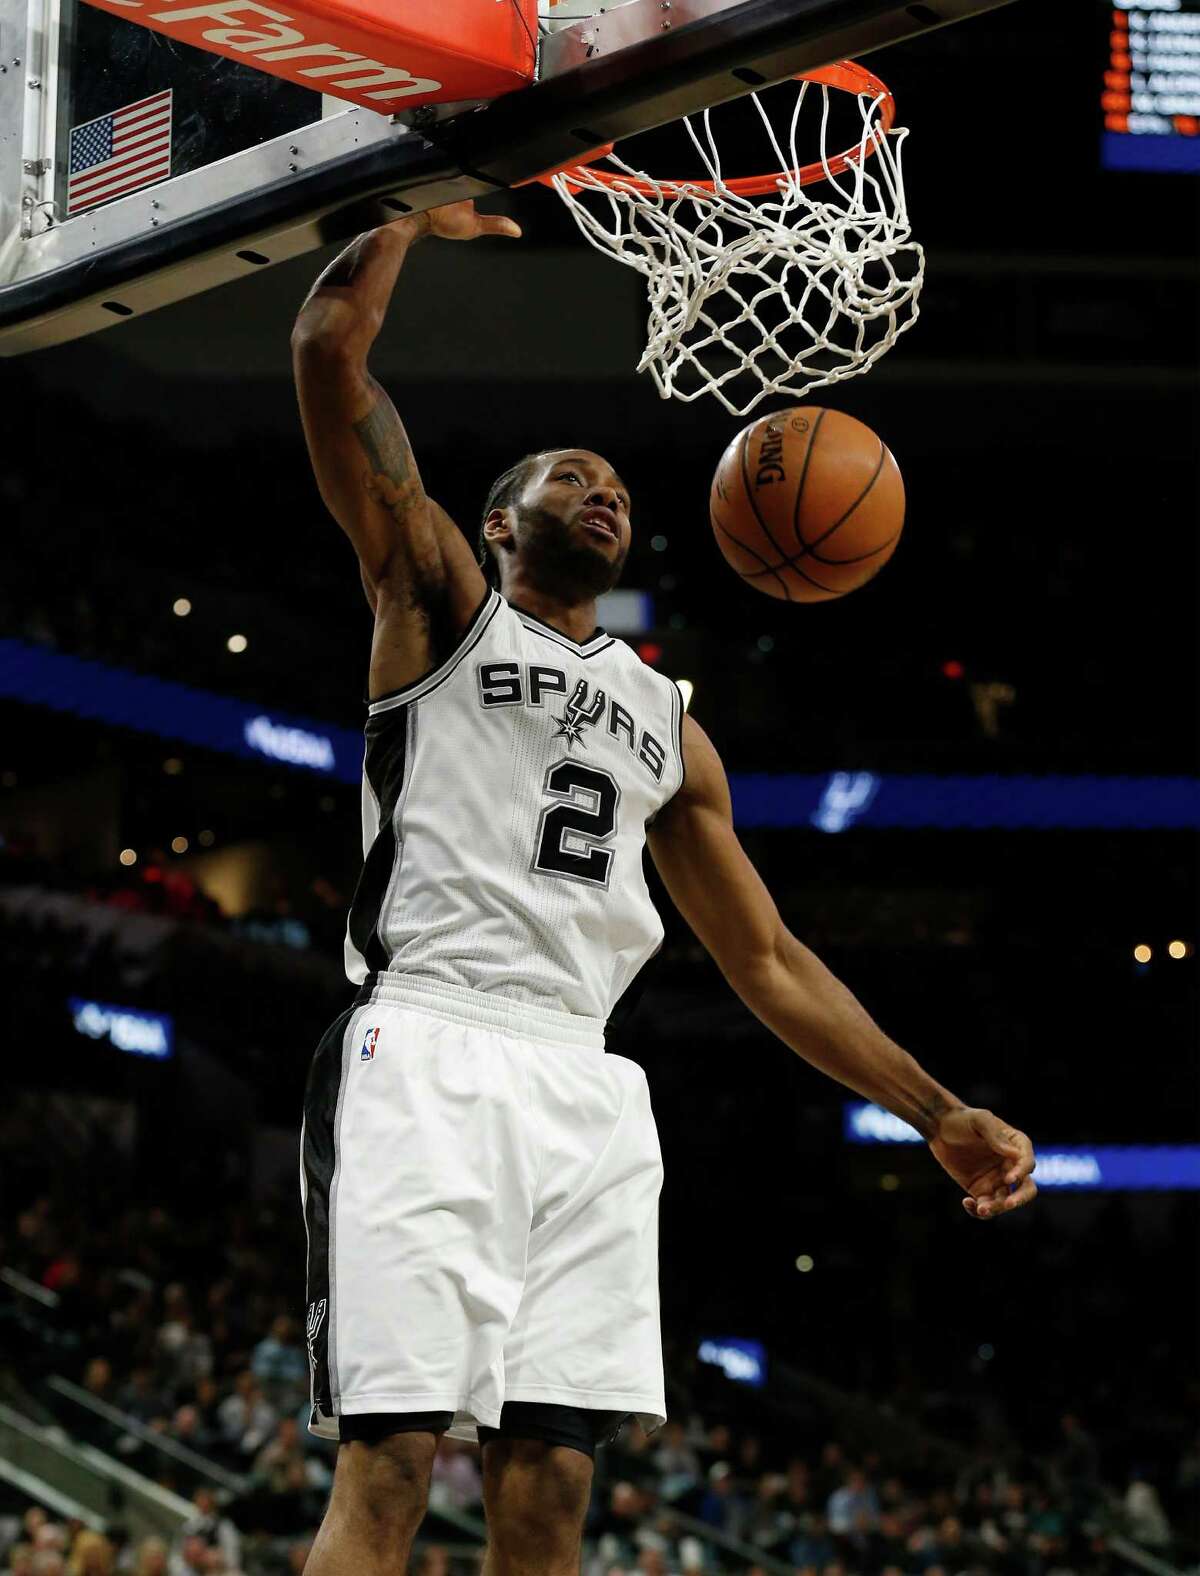 Spurs' Kawhi Leonard (02) gets an unopposed dunk against the Minnesota Timberwolves during their game at the AT&T Center on Tuesday, Jan. 17, 2017.